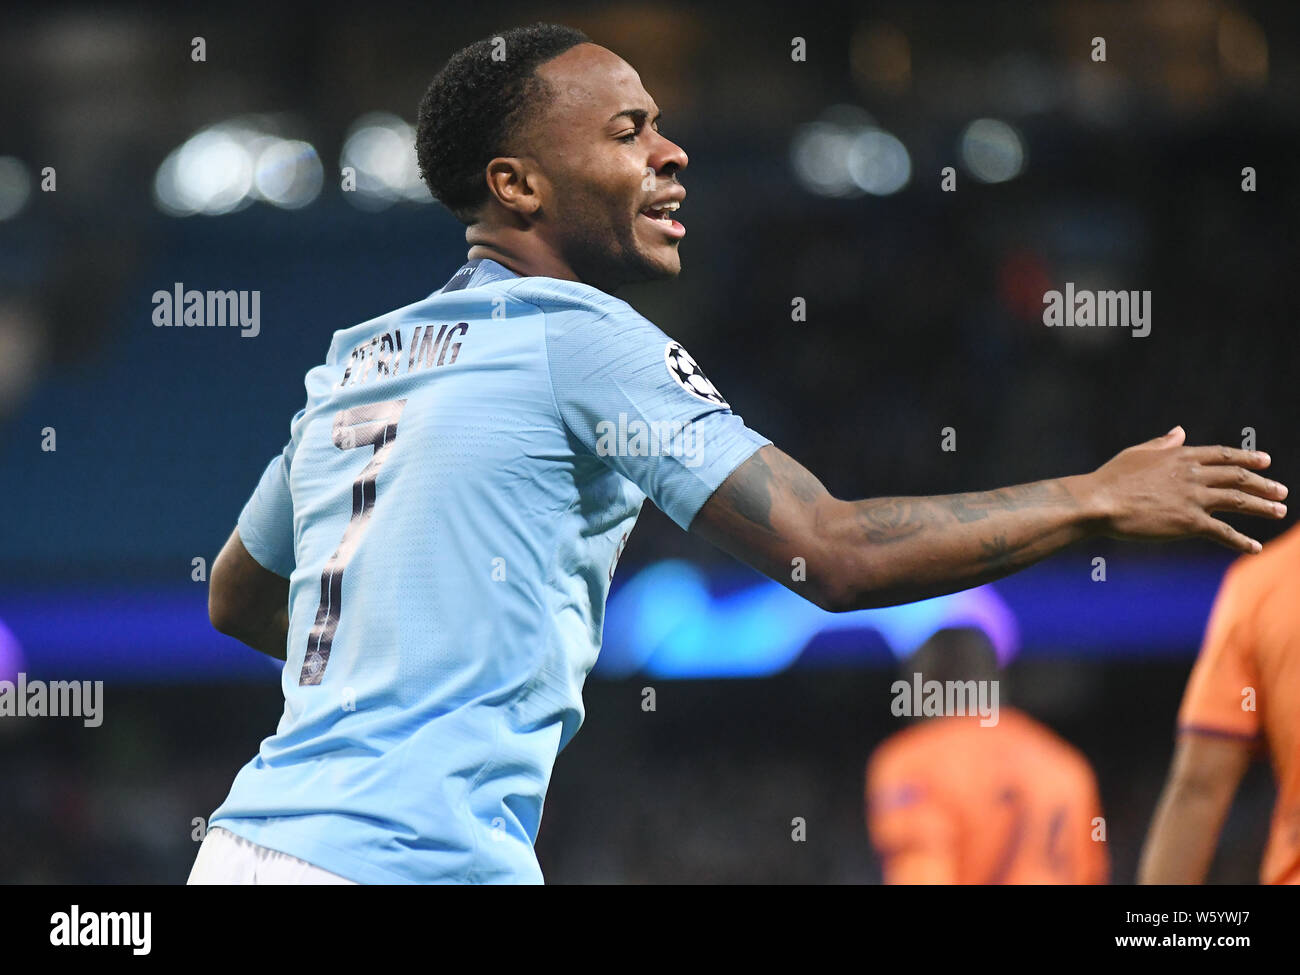 MANCHESTER, ENGLAND - SEPTEMBER 19, 2018: Raheem Sterling of City pictured during the 2018/19 UEFA Champions League Group F game between Manchester City (England) and Olympique Lyonnais (France) at Etihad Stadium. Stock Photo